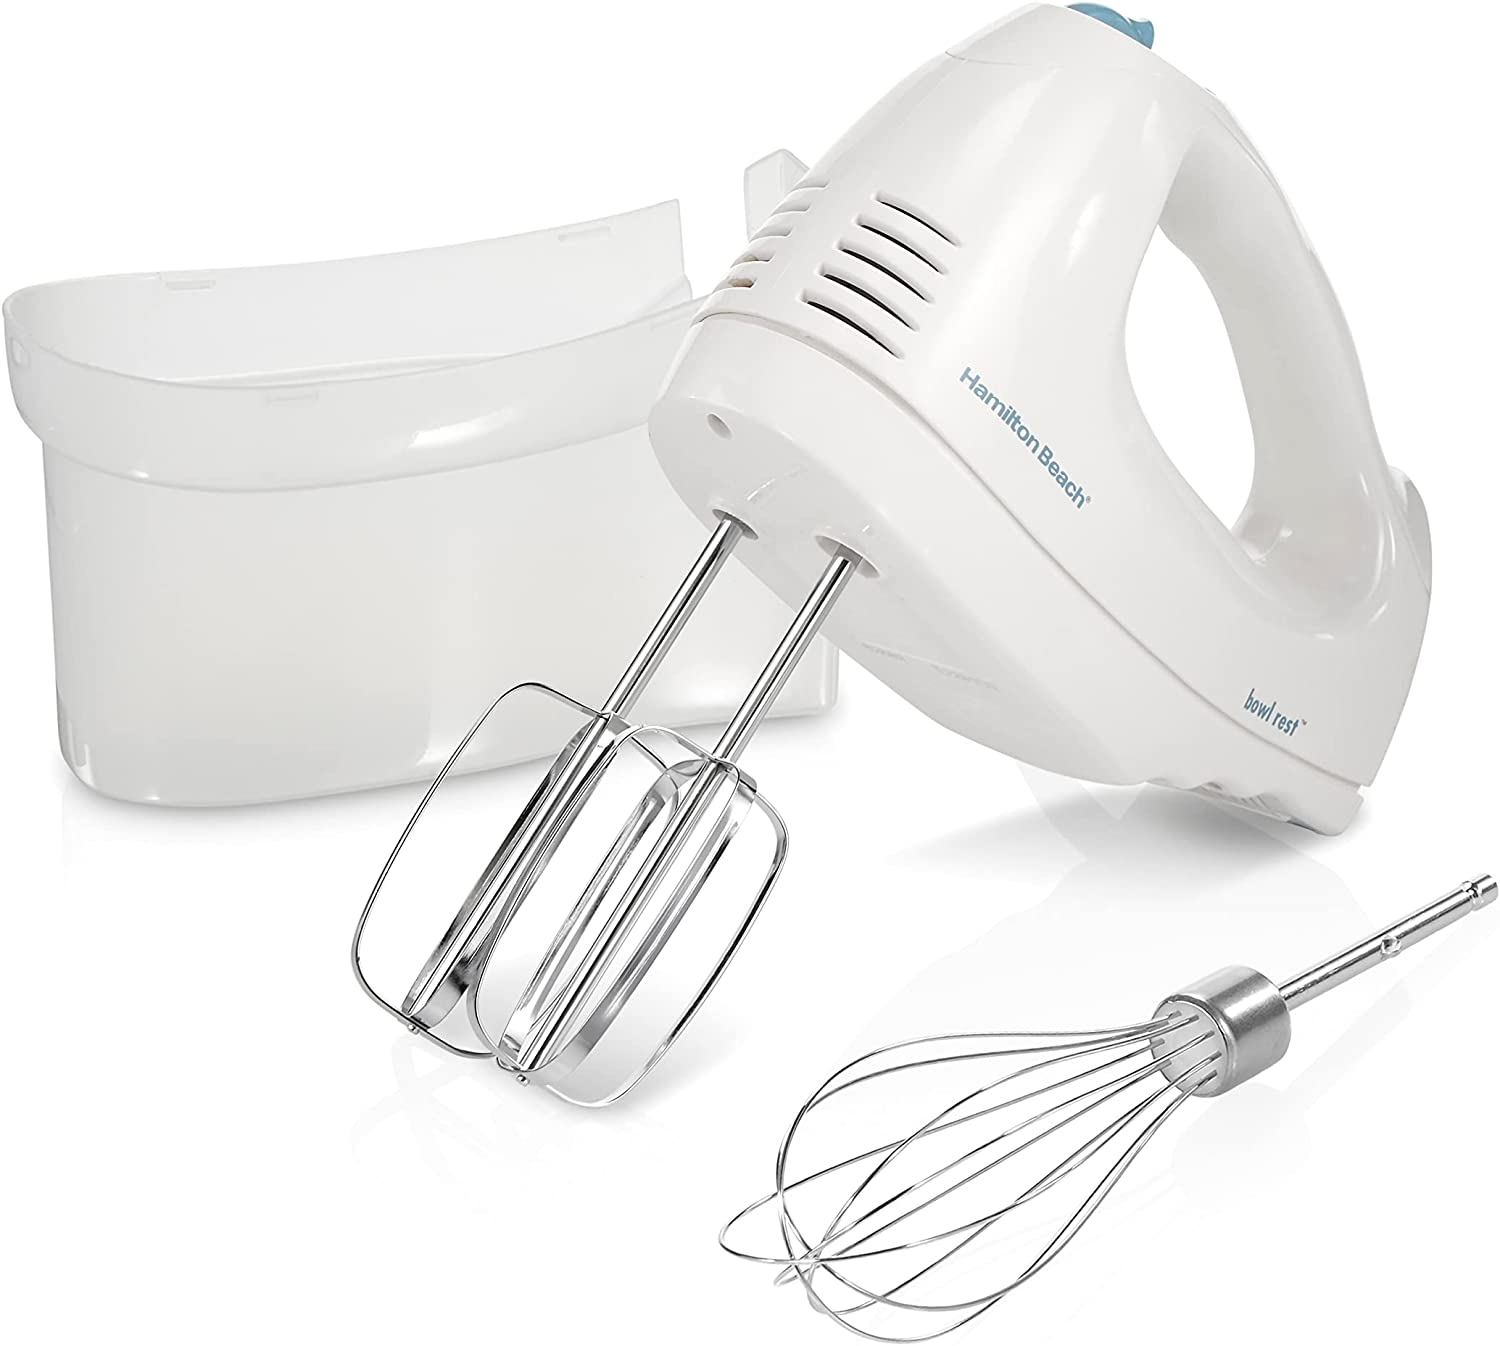 Hamilton Beach 6-Speed Electric Hand Mixer with Whisk, Traditional Beaters, Snap-On Storage Case, White Import To Shop ×Product